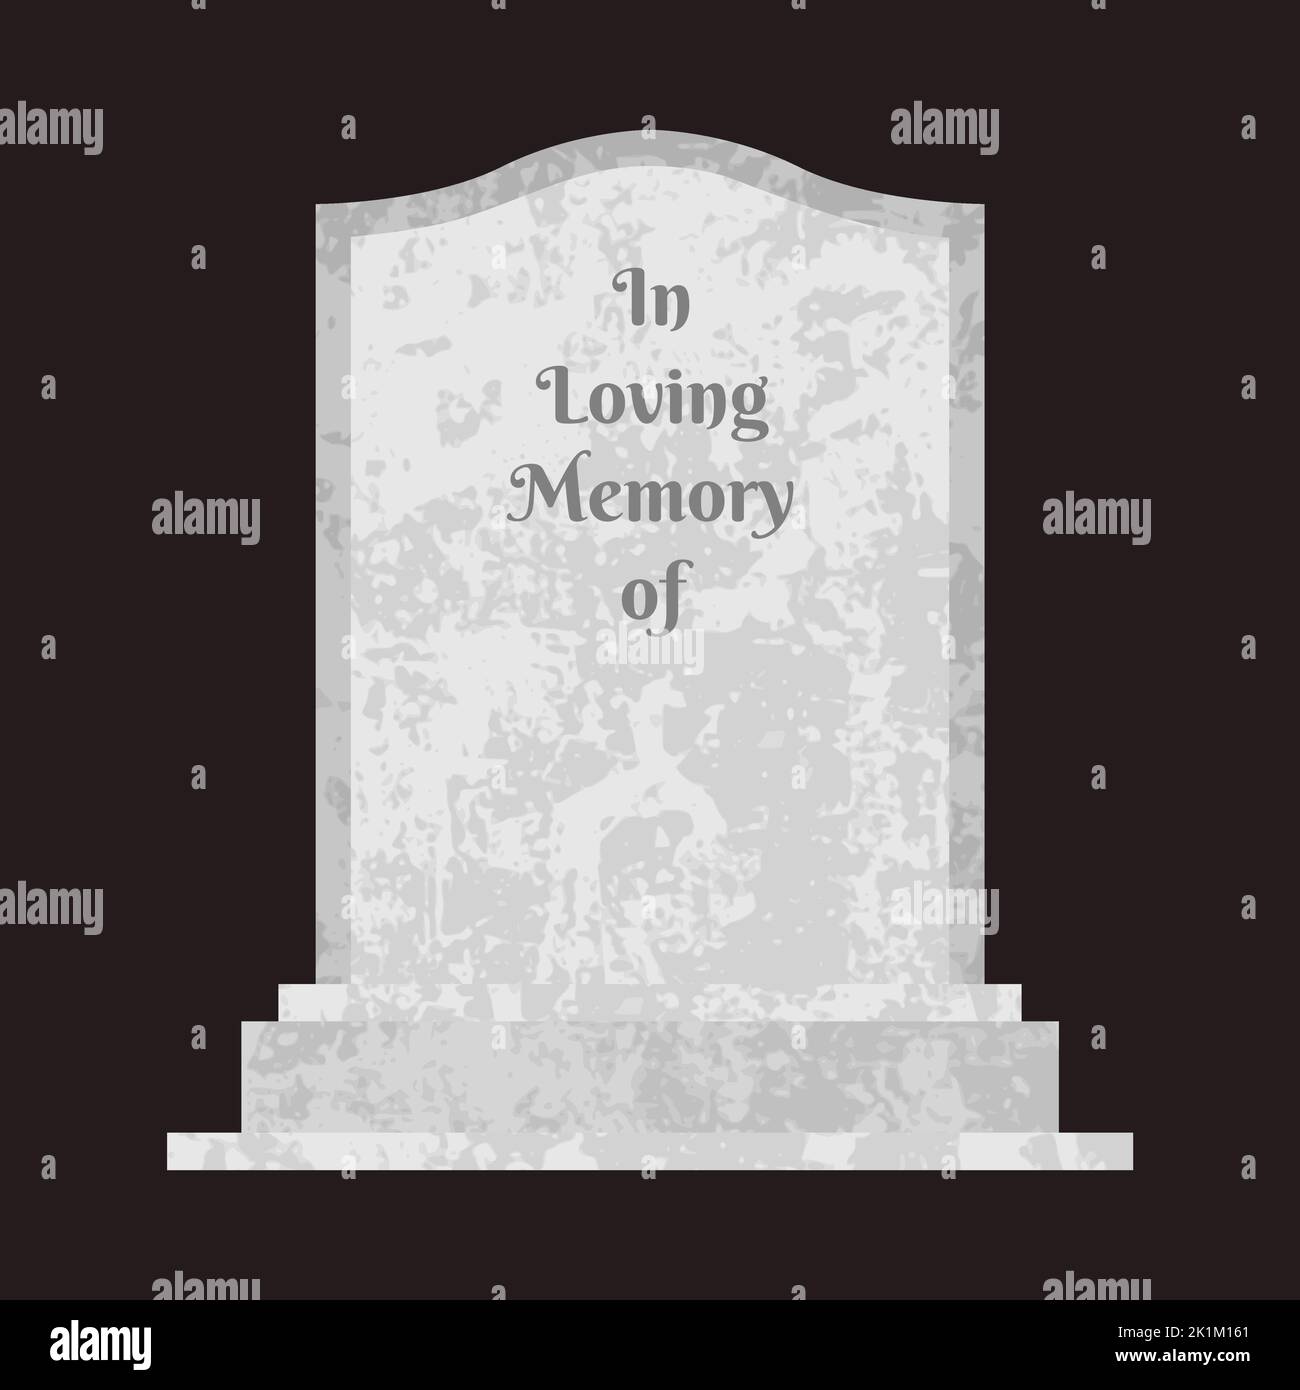 In Loving Memory Of headstone at a cemetery. Blank grave stone vector illustration. Stock Vector